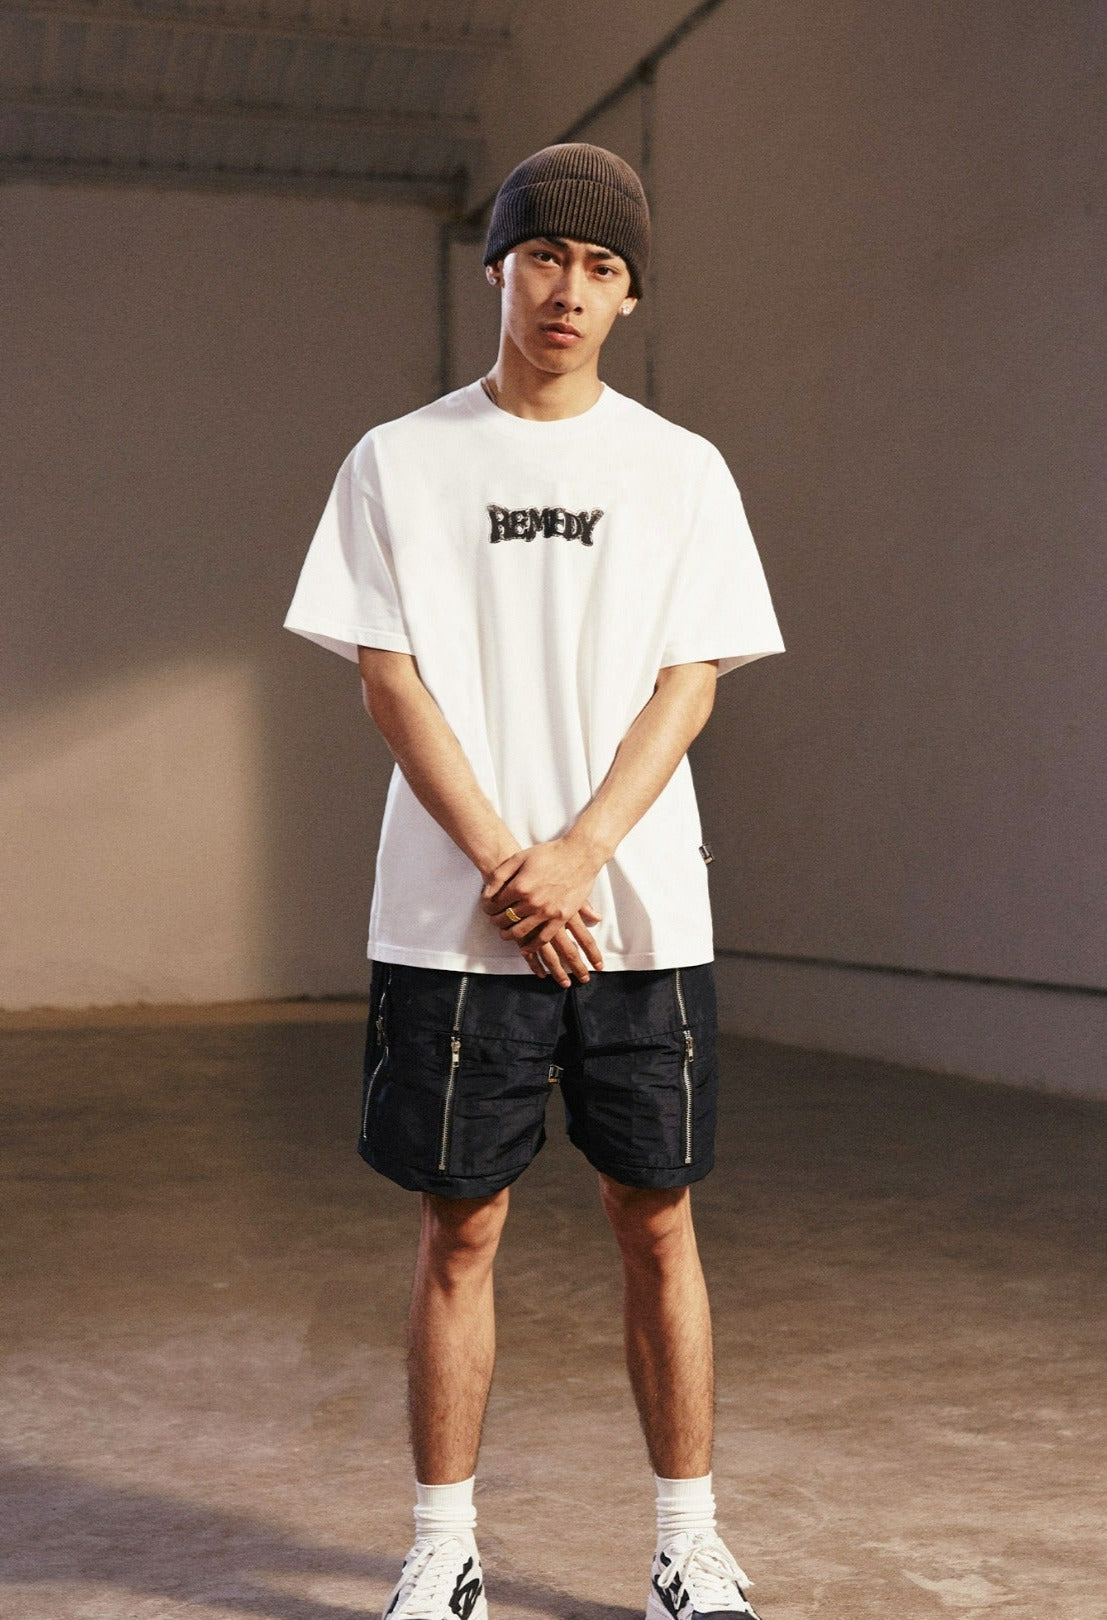 Double Sided Zip Cargo Shorts Korean Street Fashion Shorts By Remedy Shop Online at OH Vault